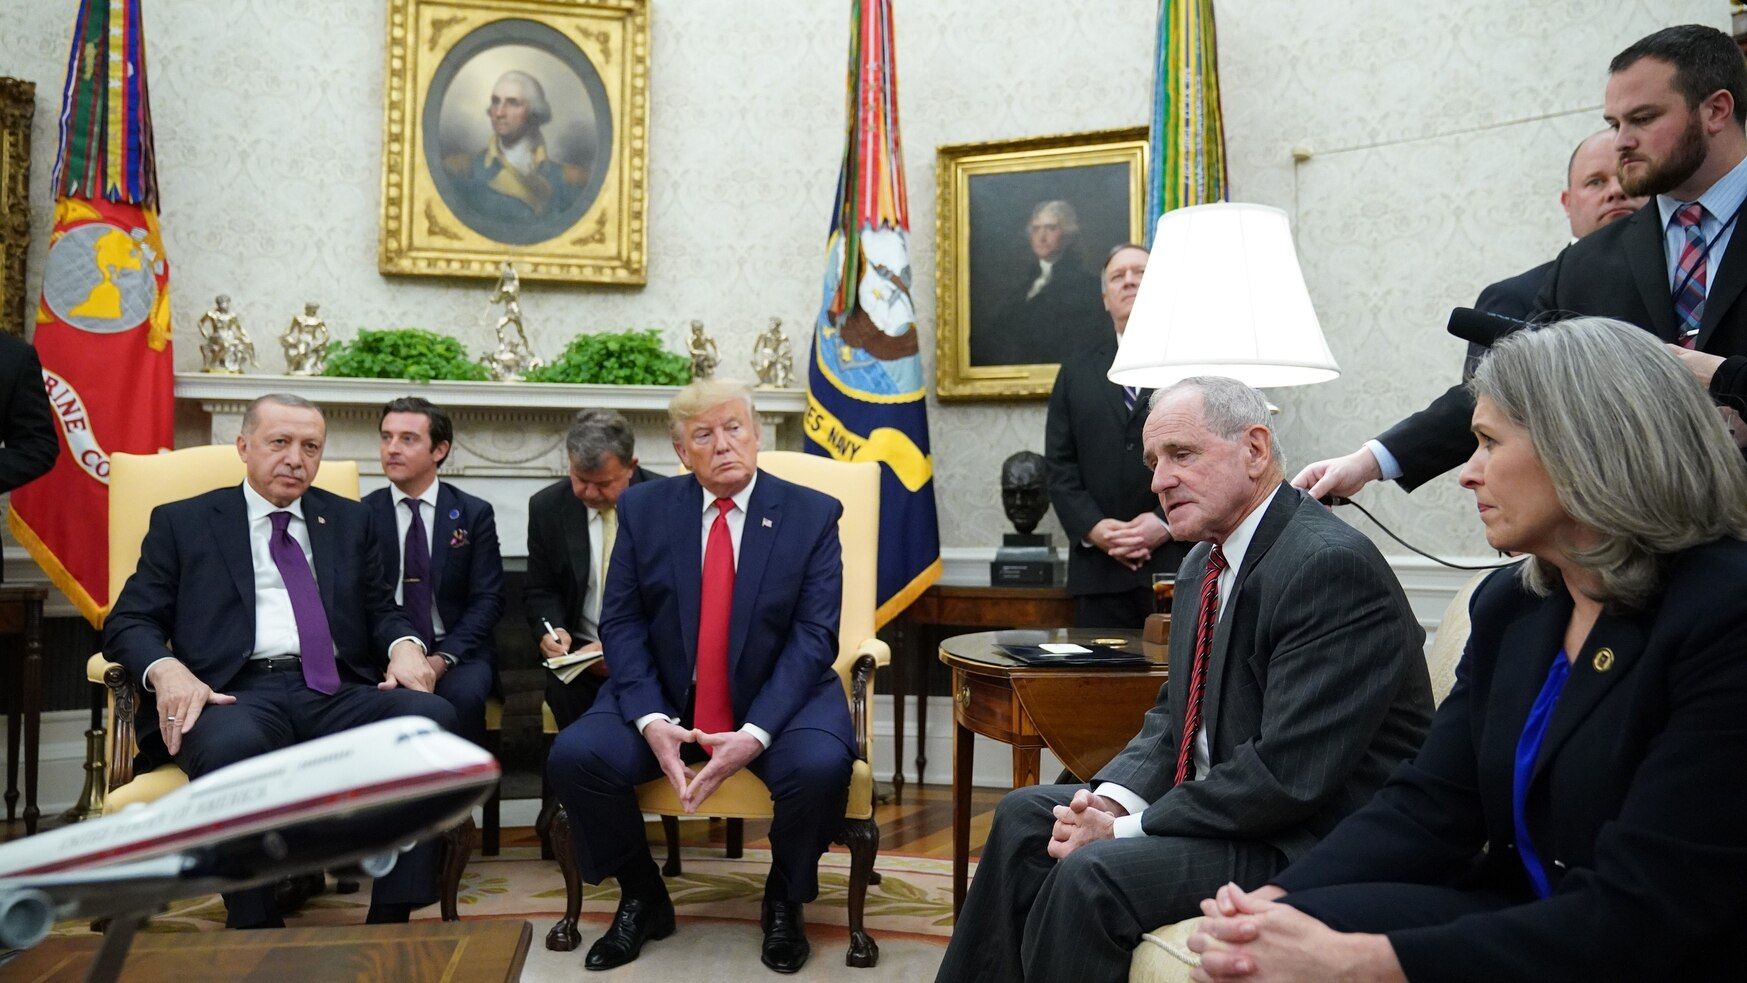 US President Donald Trump (C) and Turkey's President Recep Tayyip Erdogan (L) listen to U.S. Senate Foreign Relations Committee Jim Risch (2nd R) during a meeting in the Oval Office of the White House in Washington, DC on November 13, 2019. (MANDEL NGAN/AFP via Getty Images)